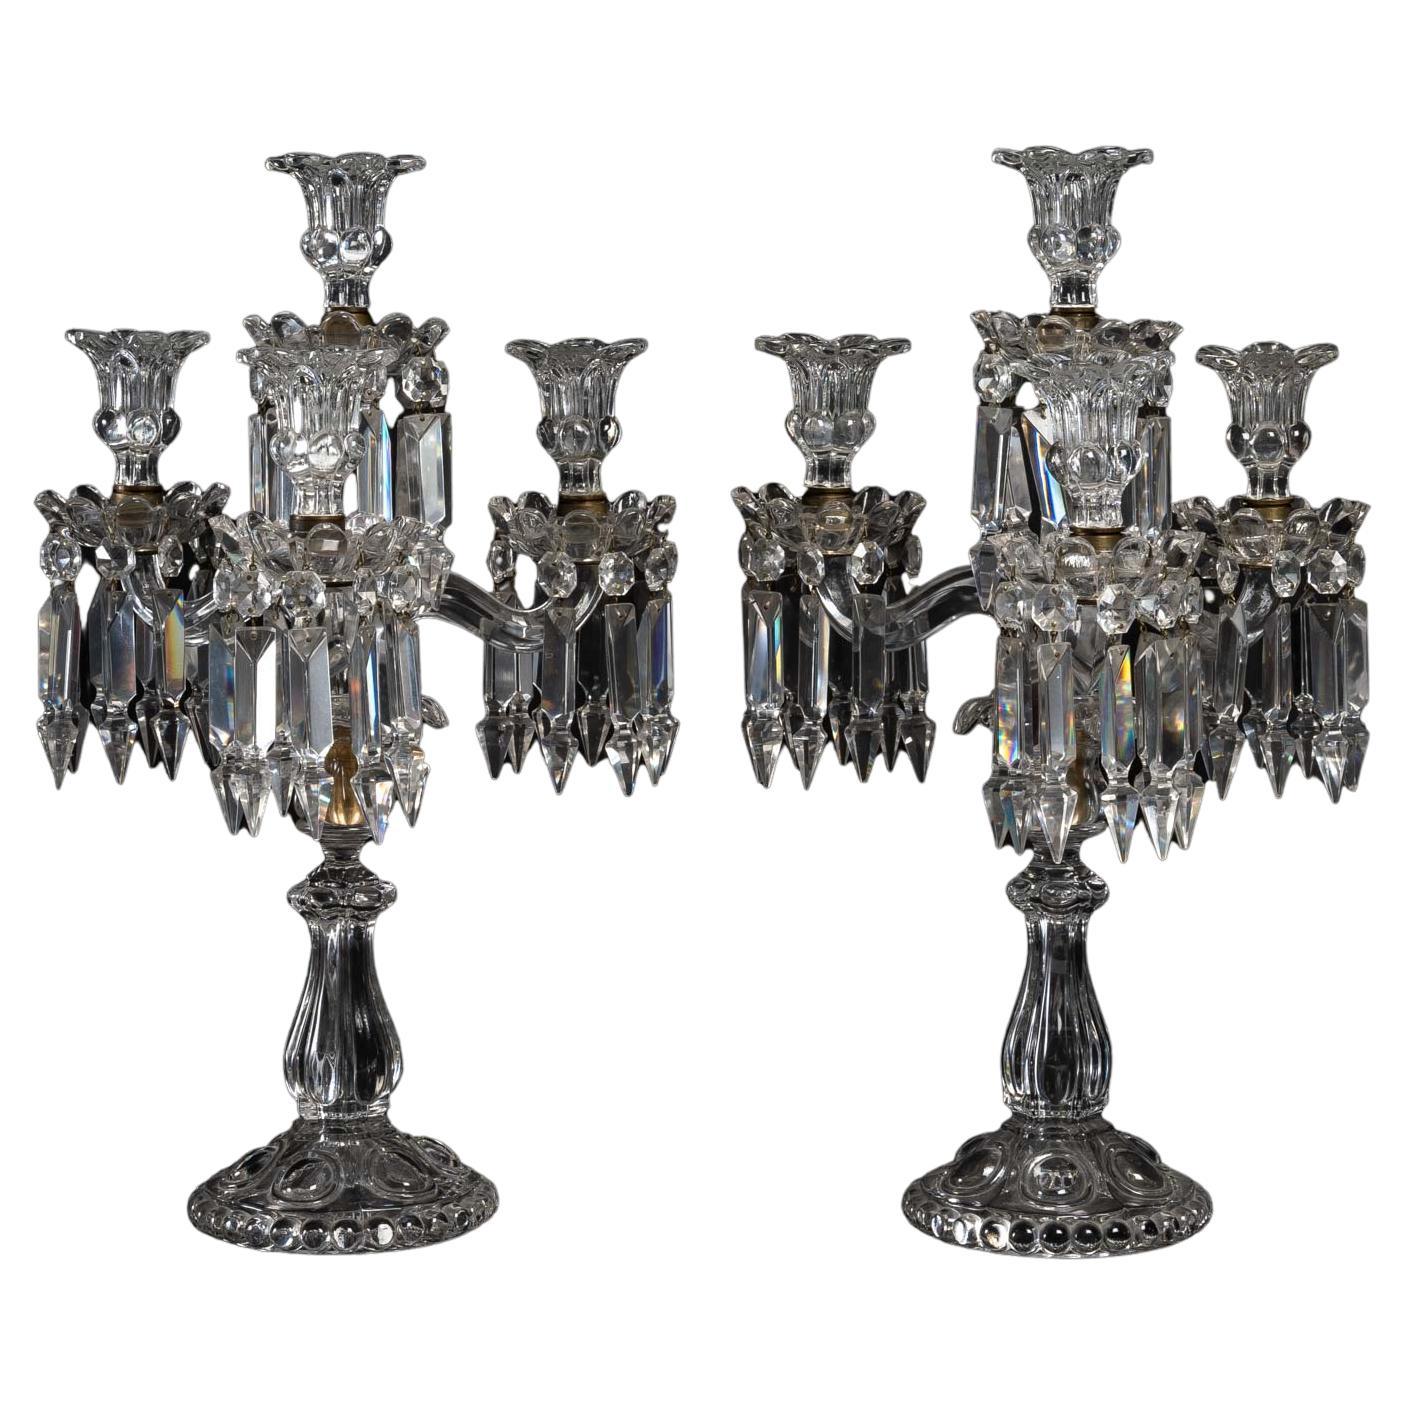 Pair of Baccarat Crystal Candelabras, Early 20th Century